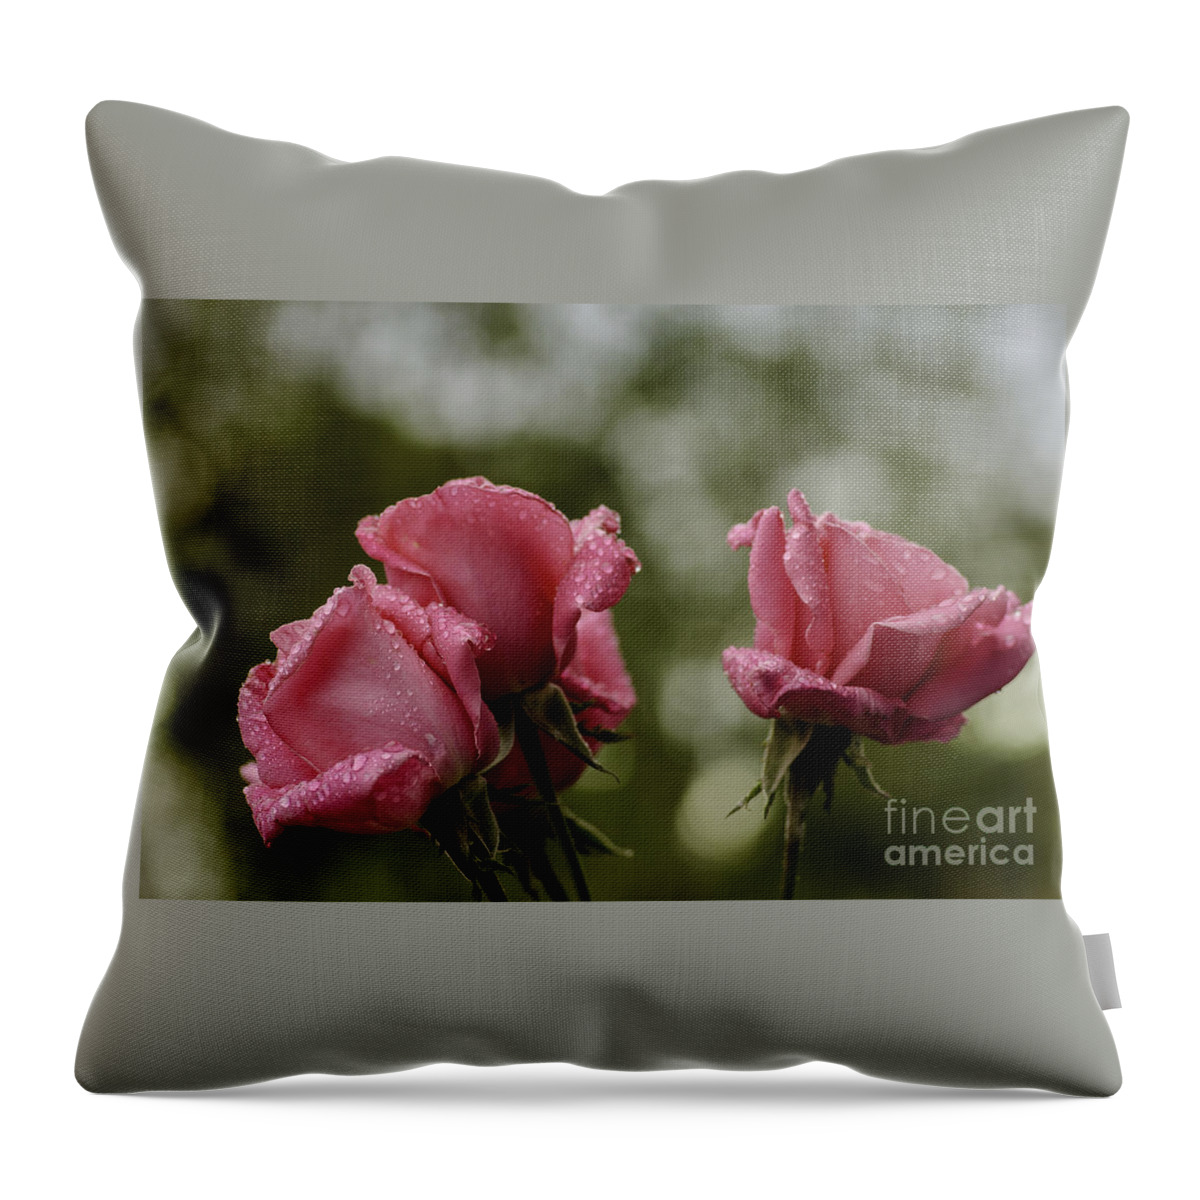 Oregon Throw Pillow featuring the photograph Just After Rain by Nick Boren